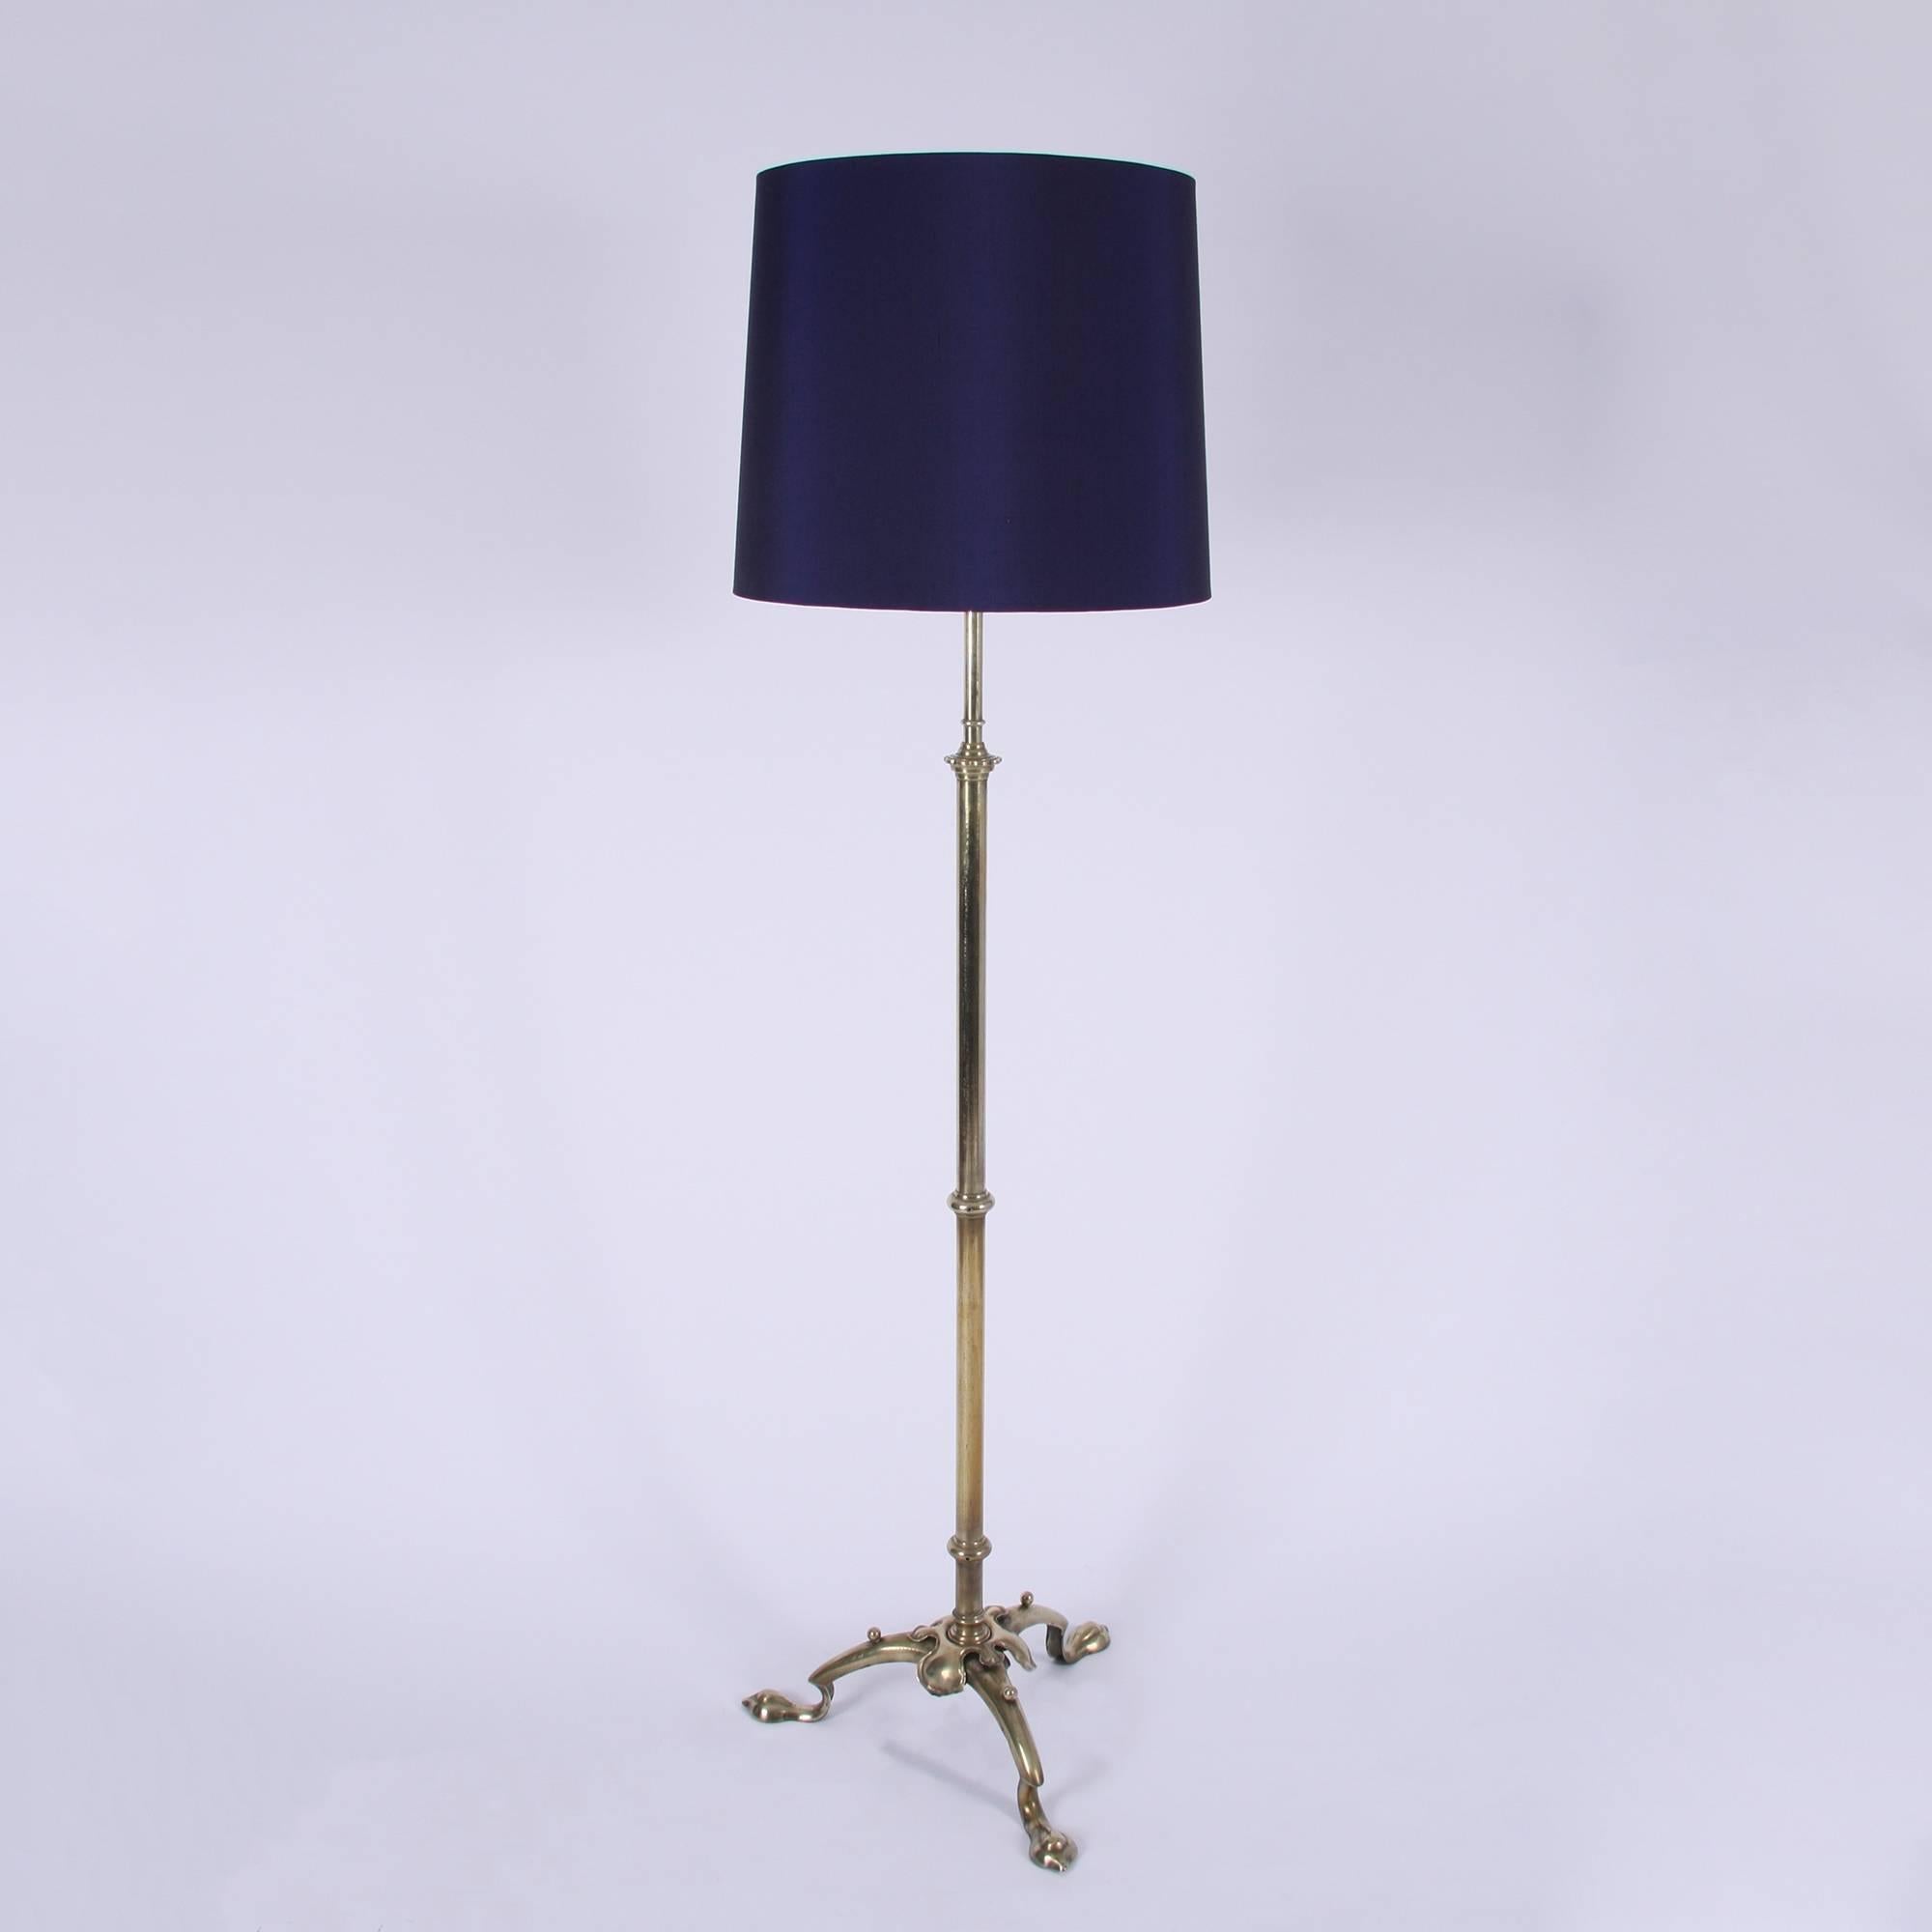 English, 20th century

Heavy brass floor lamp with triform base. With bespoke handmade silk lampshade. Rewired and PAT tested.